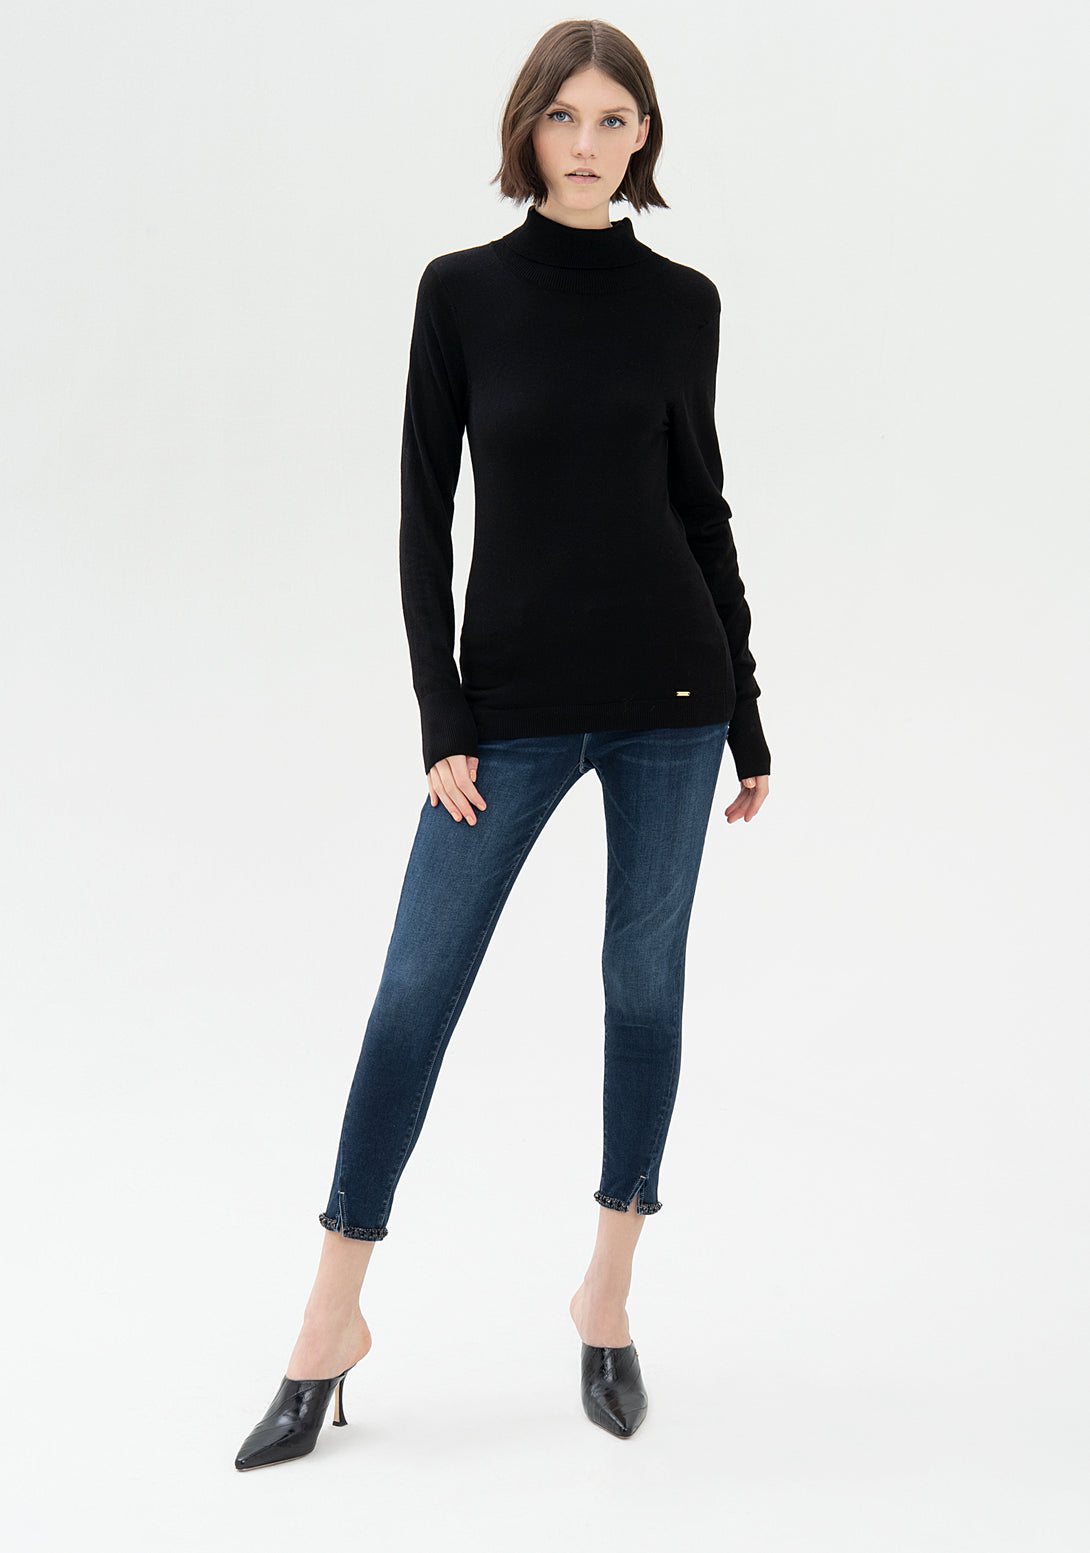 Knitwear tight fit with long sleeves